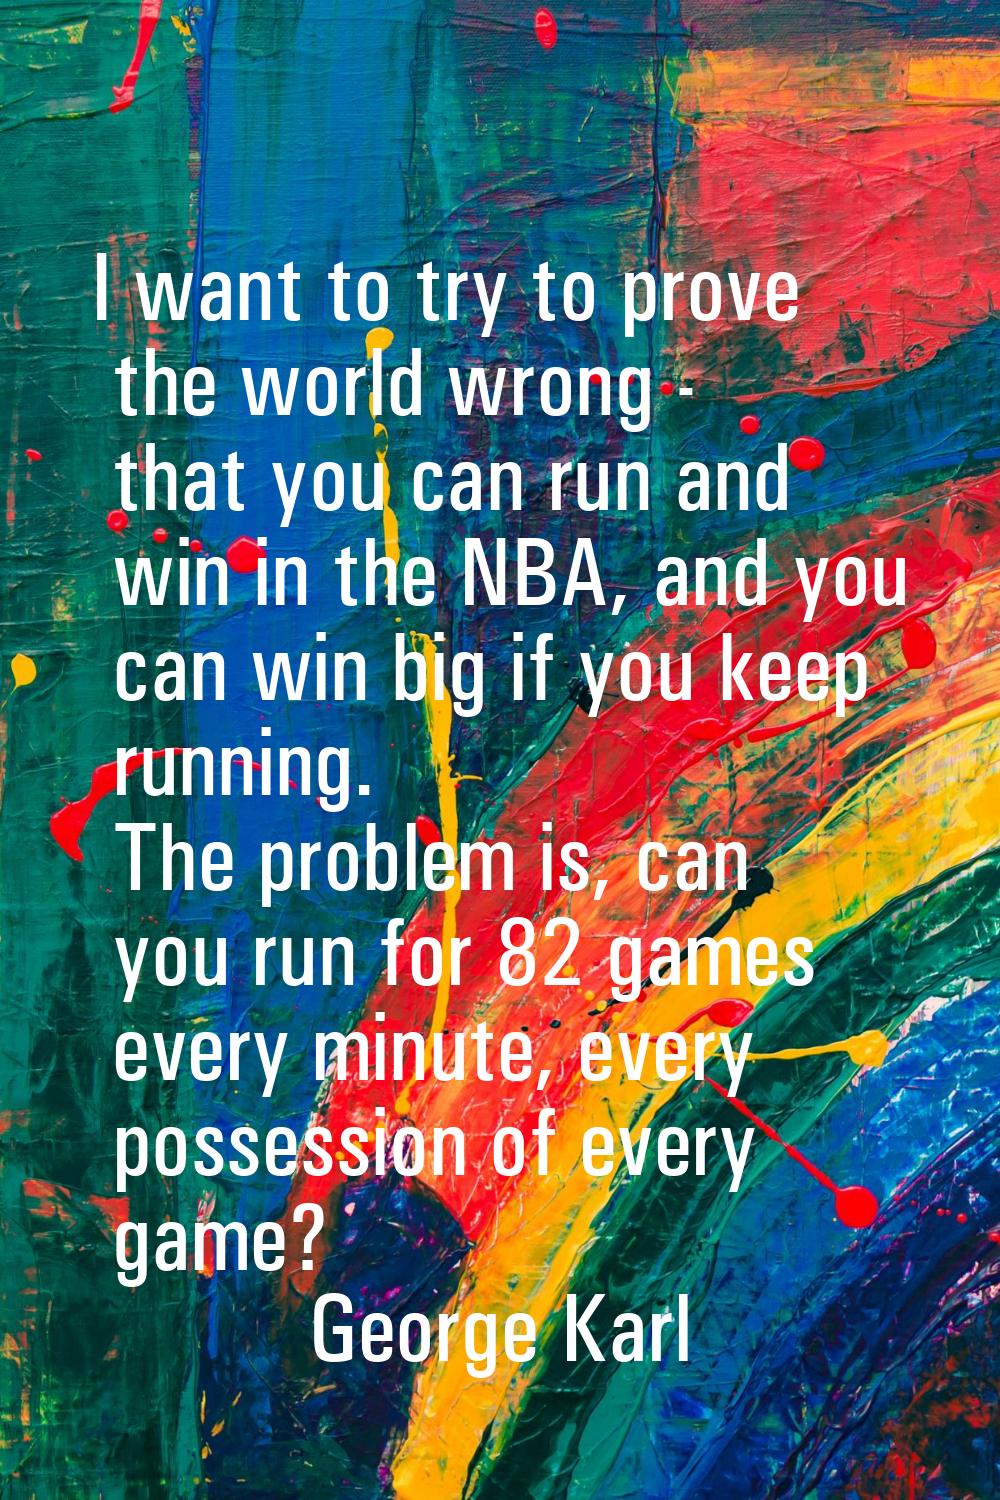 I want to try to prove the world wrong - that you can run and win in the NBA, and you can win big i